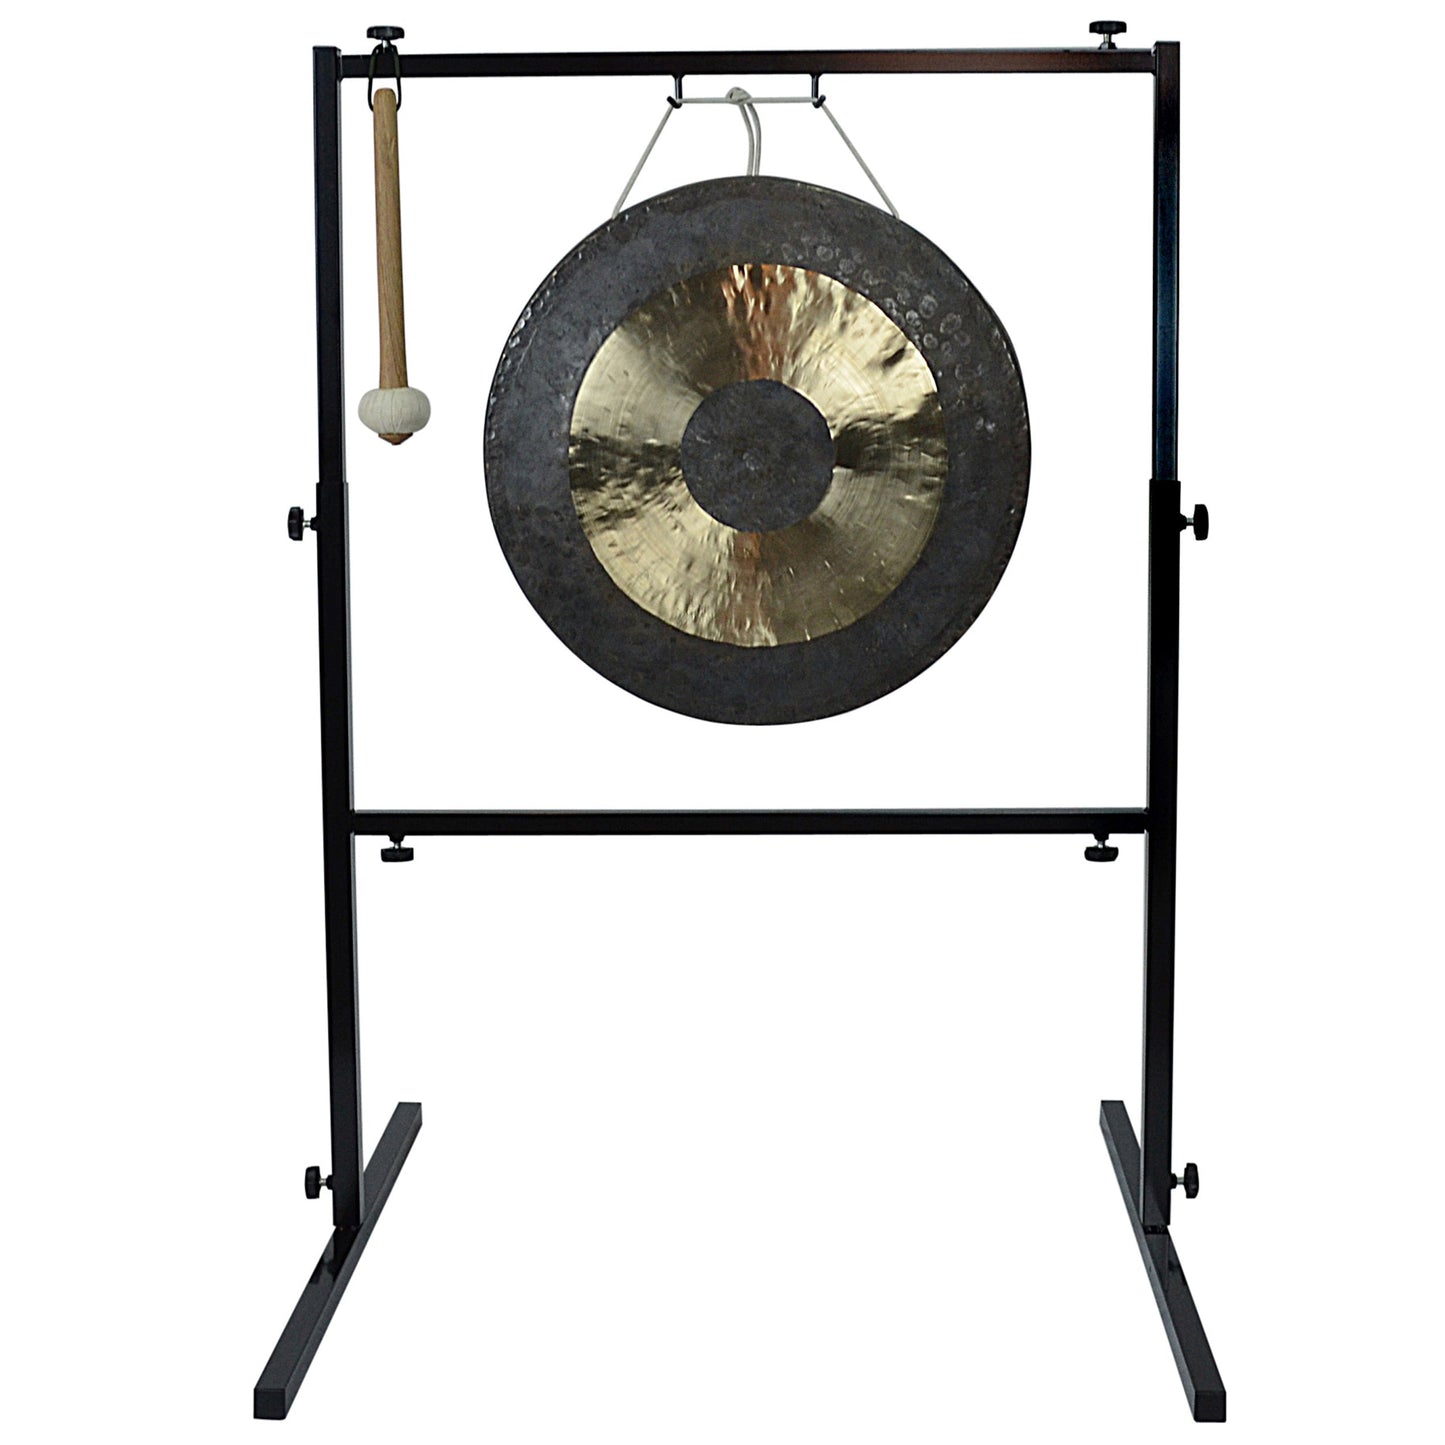 The Gong Shop Featured Products 20" Medium Chau Gongs on Adjustable Metal Gong Stand